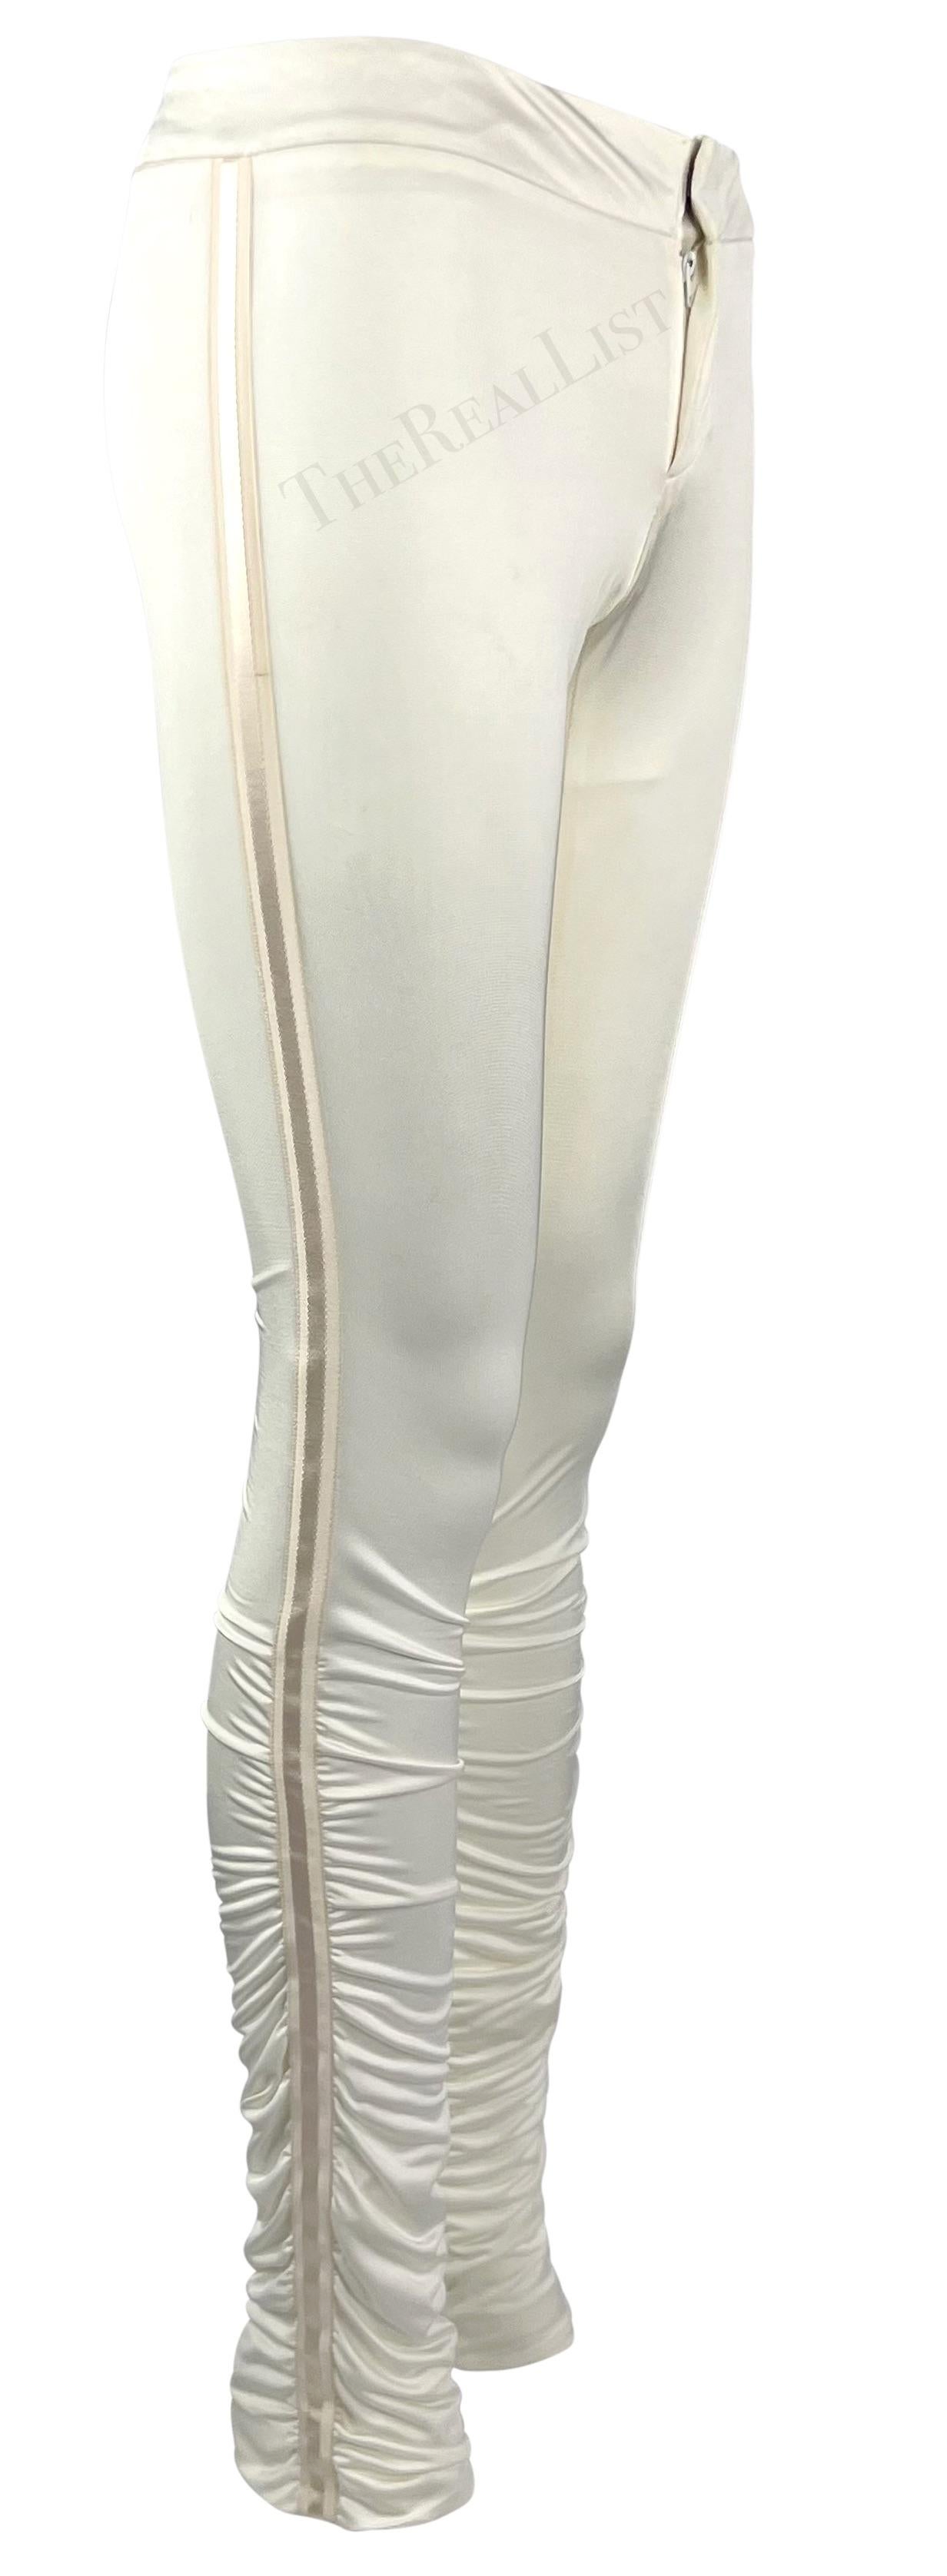 Presenting a pair of white Gucci pants, designed by Tom Ford. From the Fall/Winter 2004 collection, these form-fitting satin pants feature ruching at the calves and are made complete with a monochrome striped ribbon on either side. Never worn